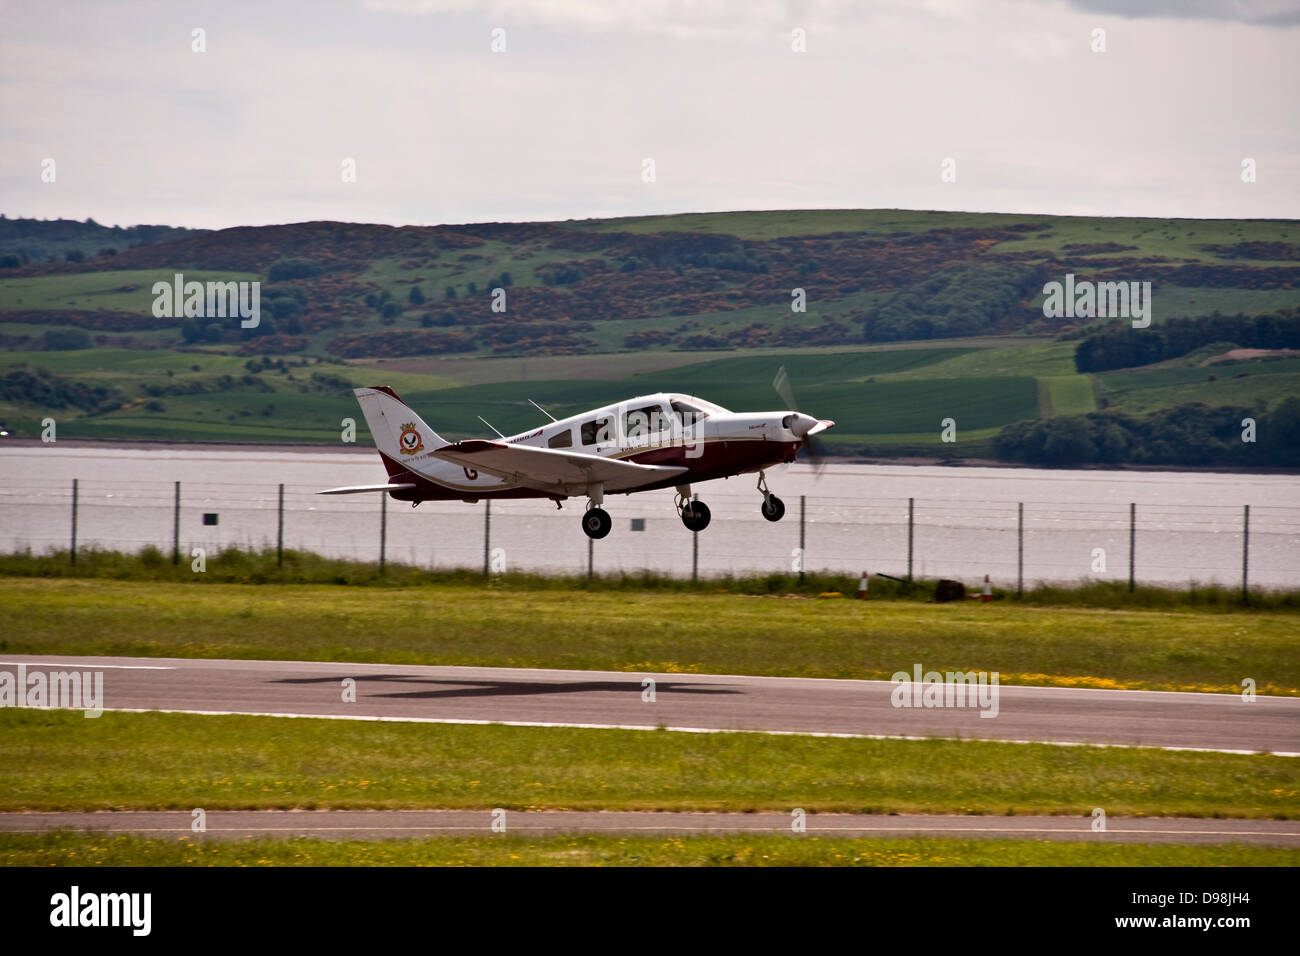 Shadow on the runway as the Tayside Aviation G-BXOJ Training aircraft takes off from Dundee Airport, UK Stock Photo